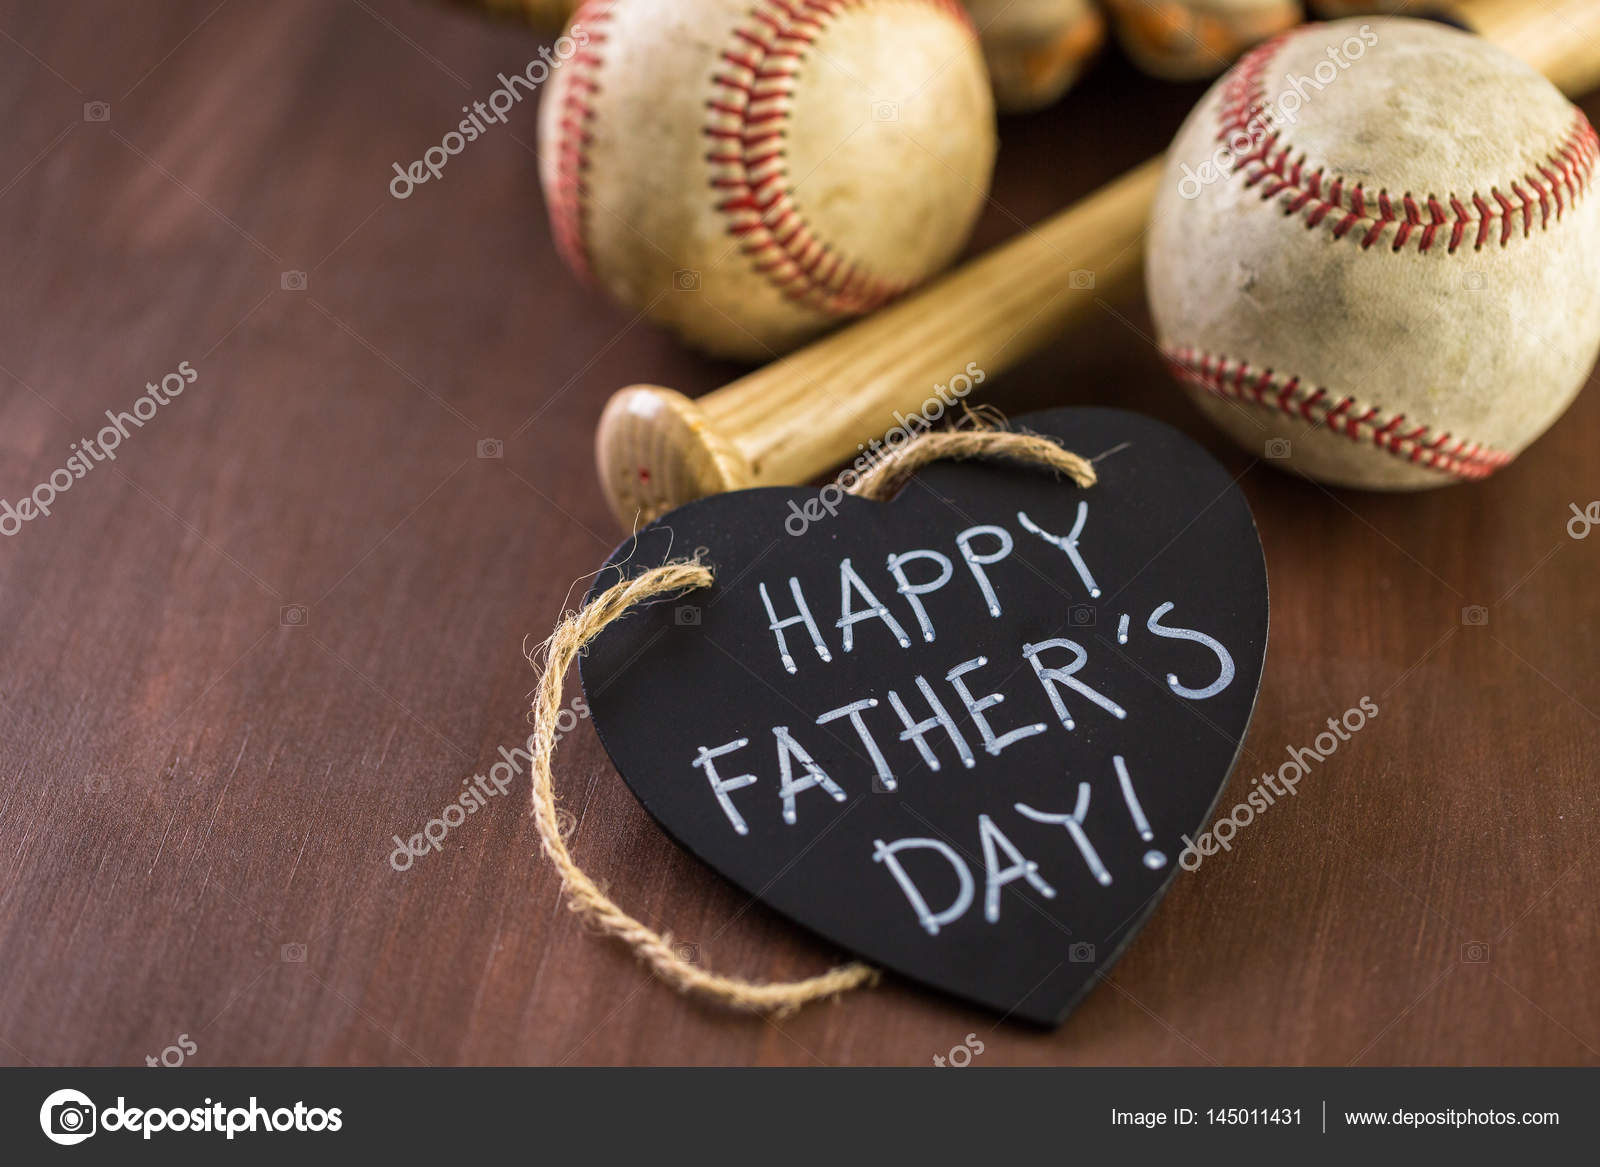 Father's Day gifts Stock Photo by ©urban_light 145011431